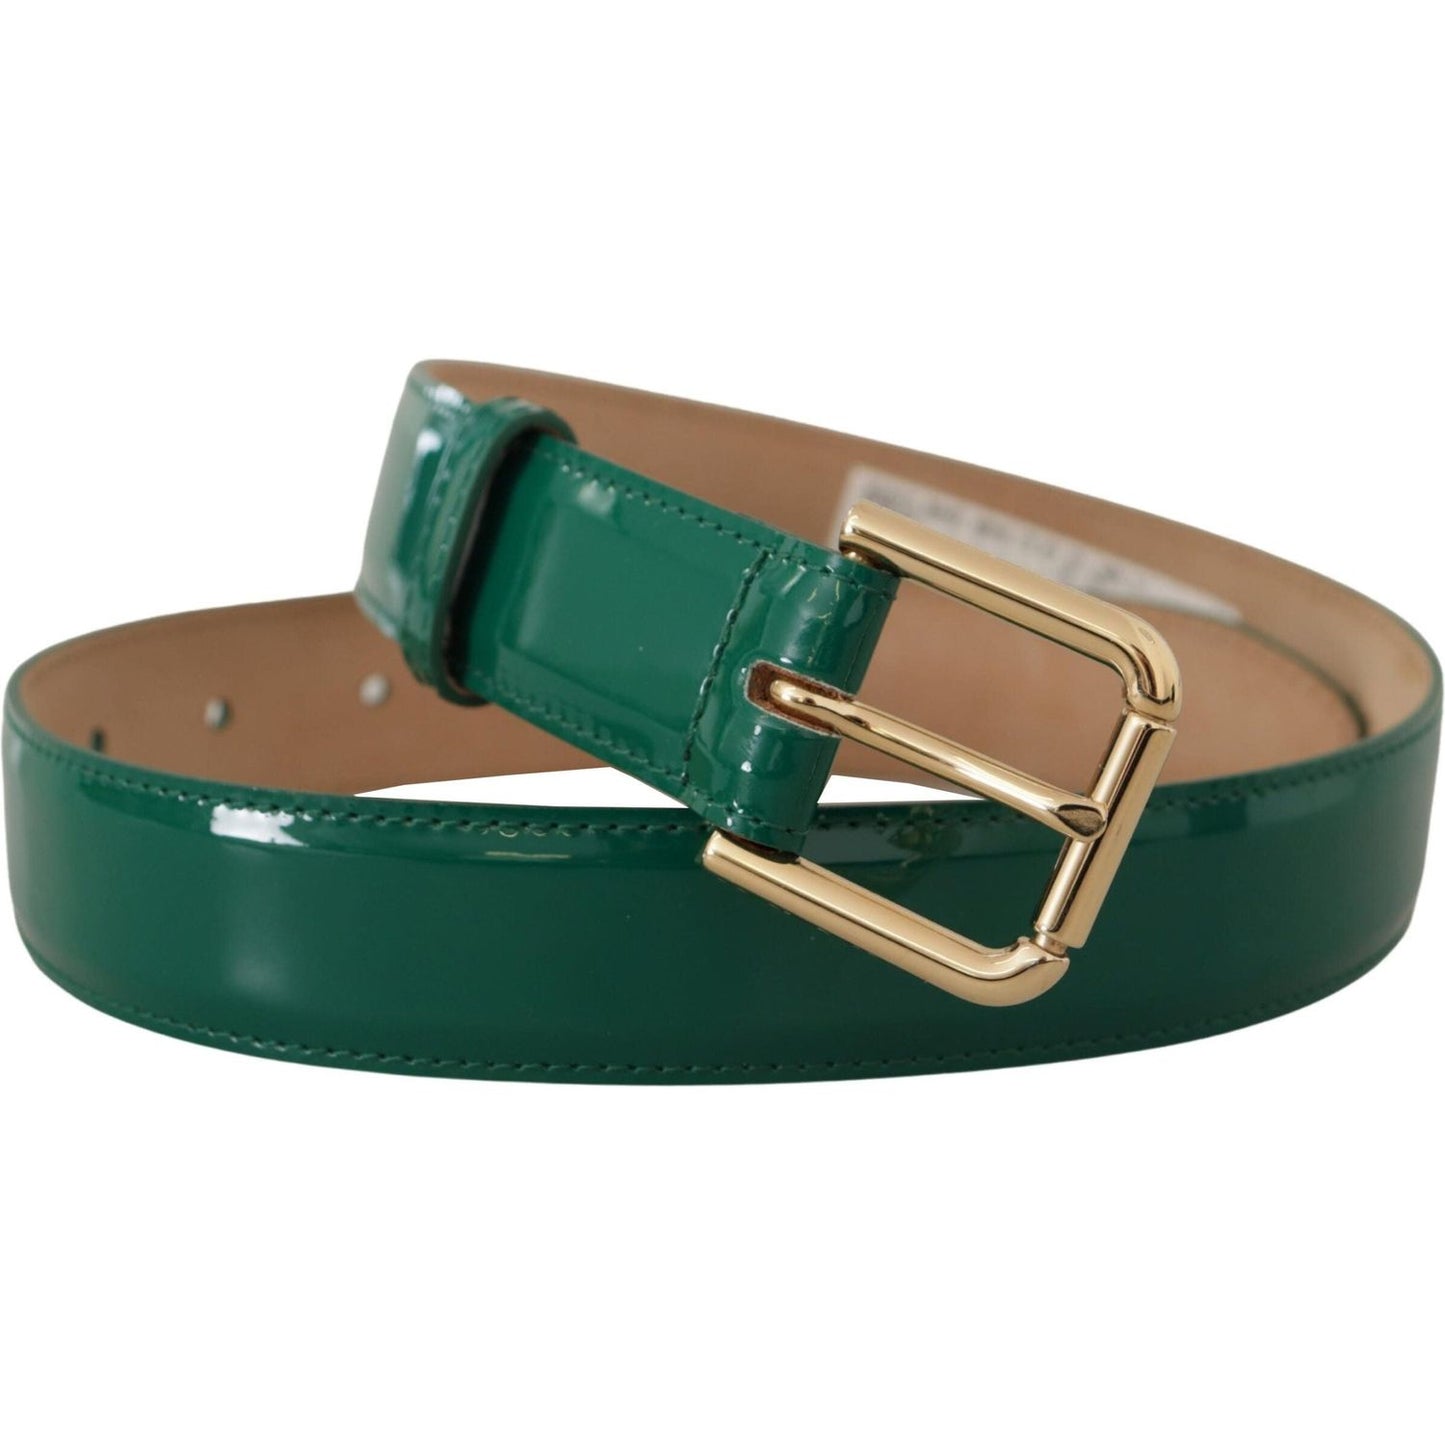 Dolce & Gabbana Elegant Green Leather Belt with Gold Buckle Detail green-patent-leather-logo-engraved-buckle-belt IMG_8004-1-scaled-3a7ee116-2e7.jpg